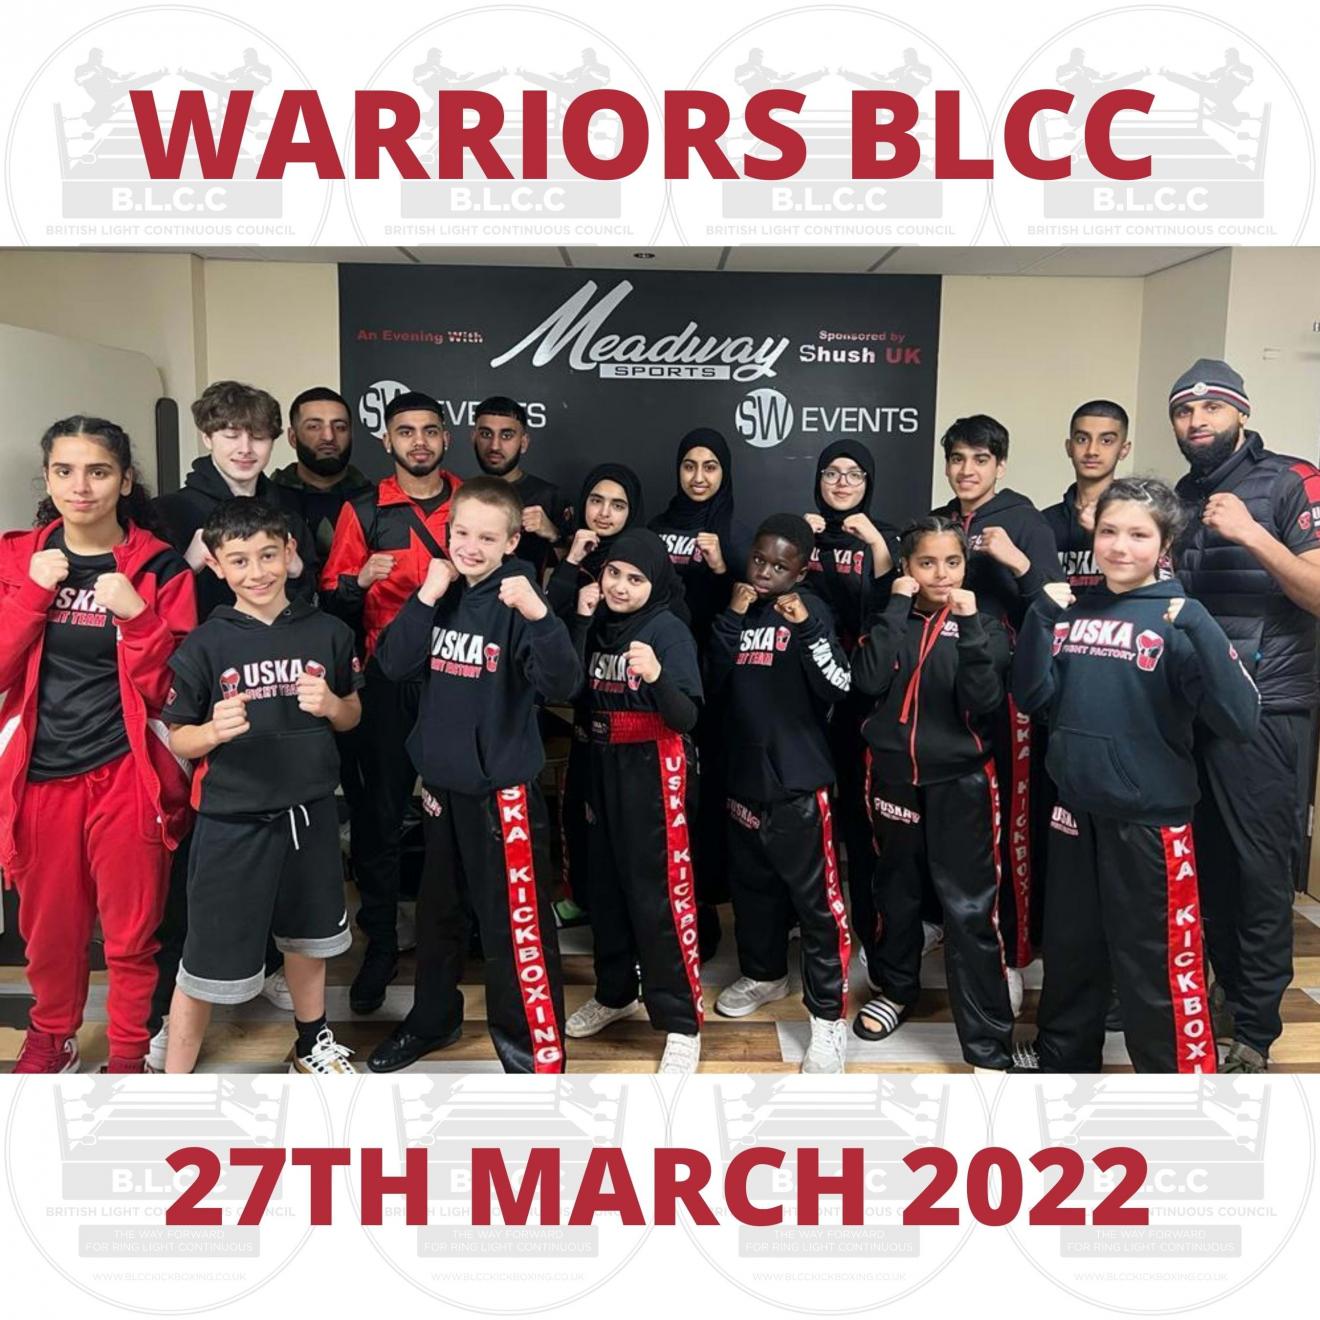 27-03-22 - Mothers Day Warriors BLCC success for USKA Fight Team